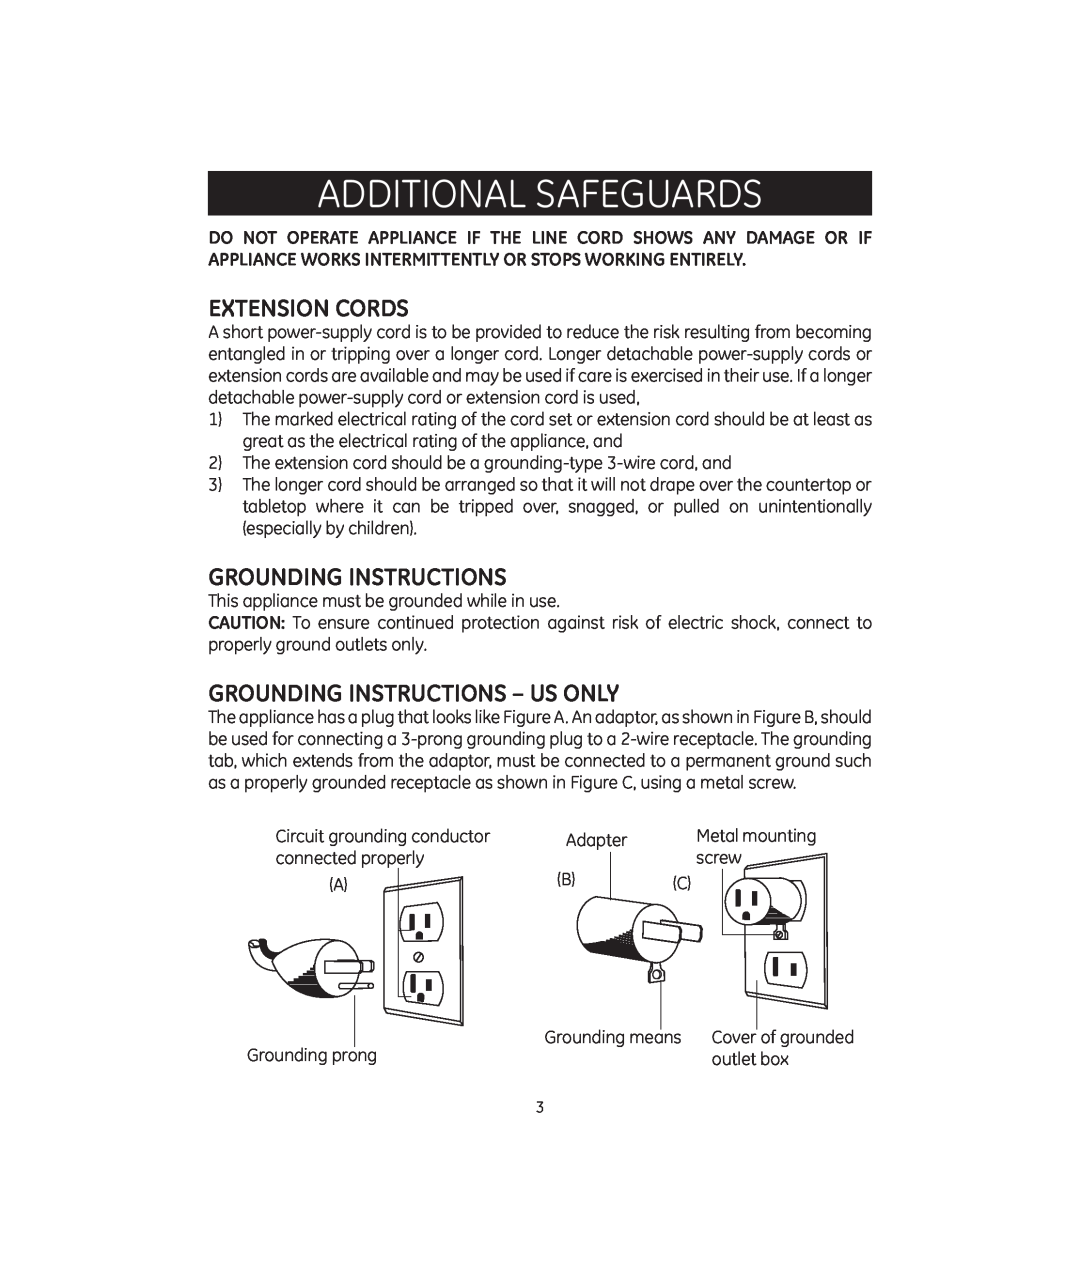 GE 681131692144 manual Additional Safeguards, Extension Cords, Grounding Instructions - Us Only 